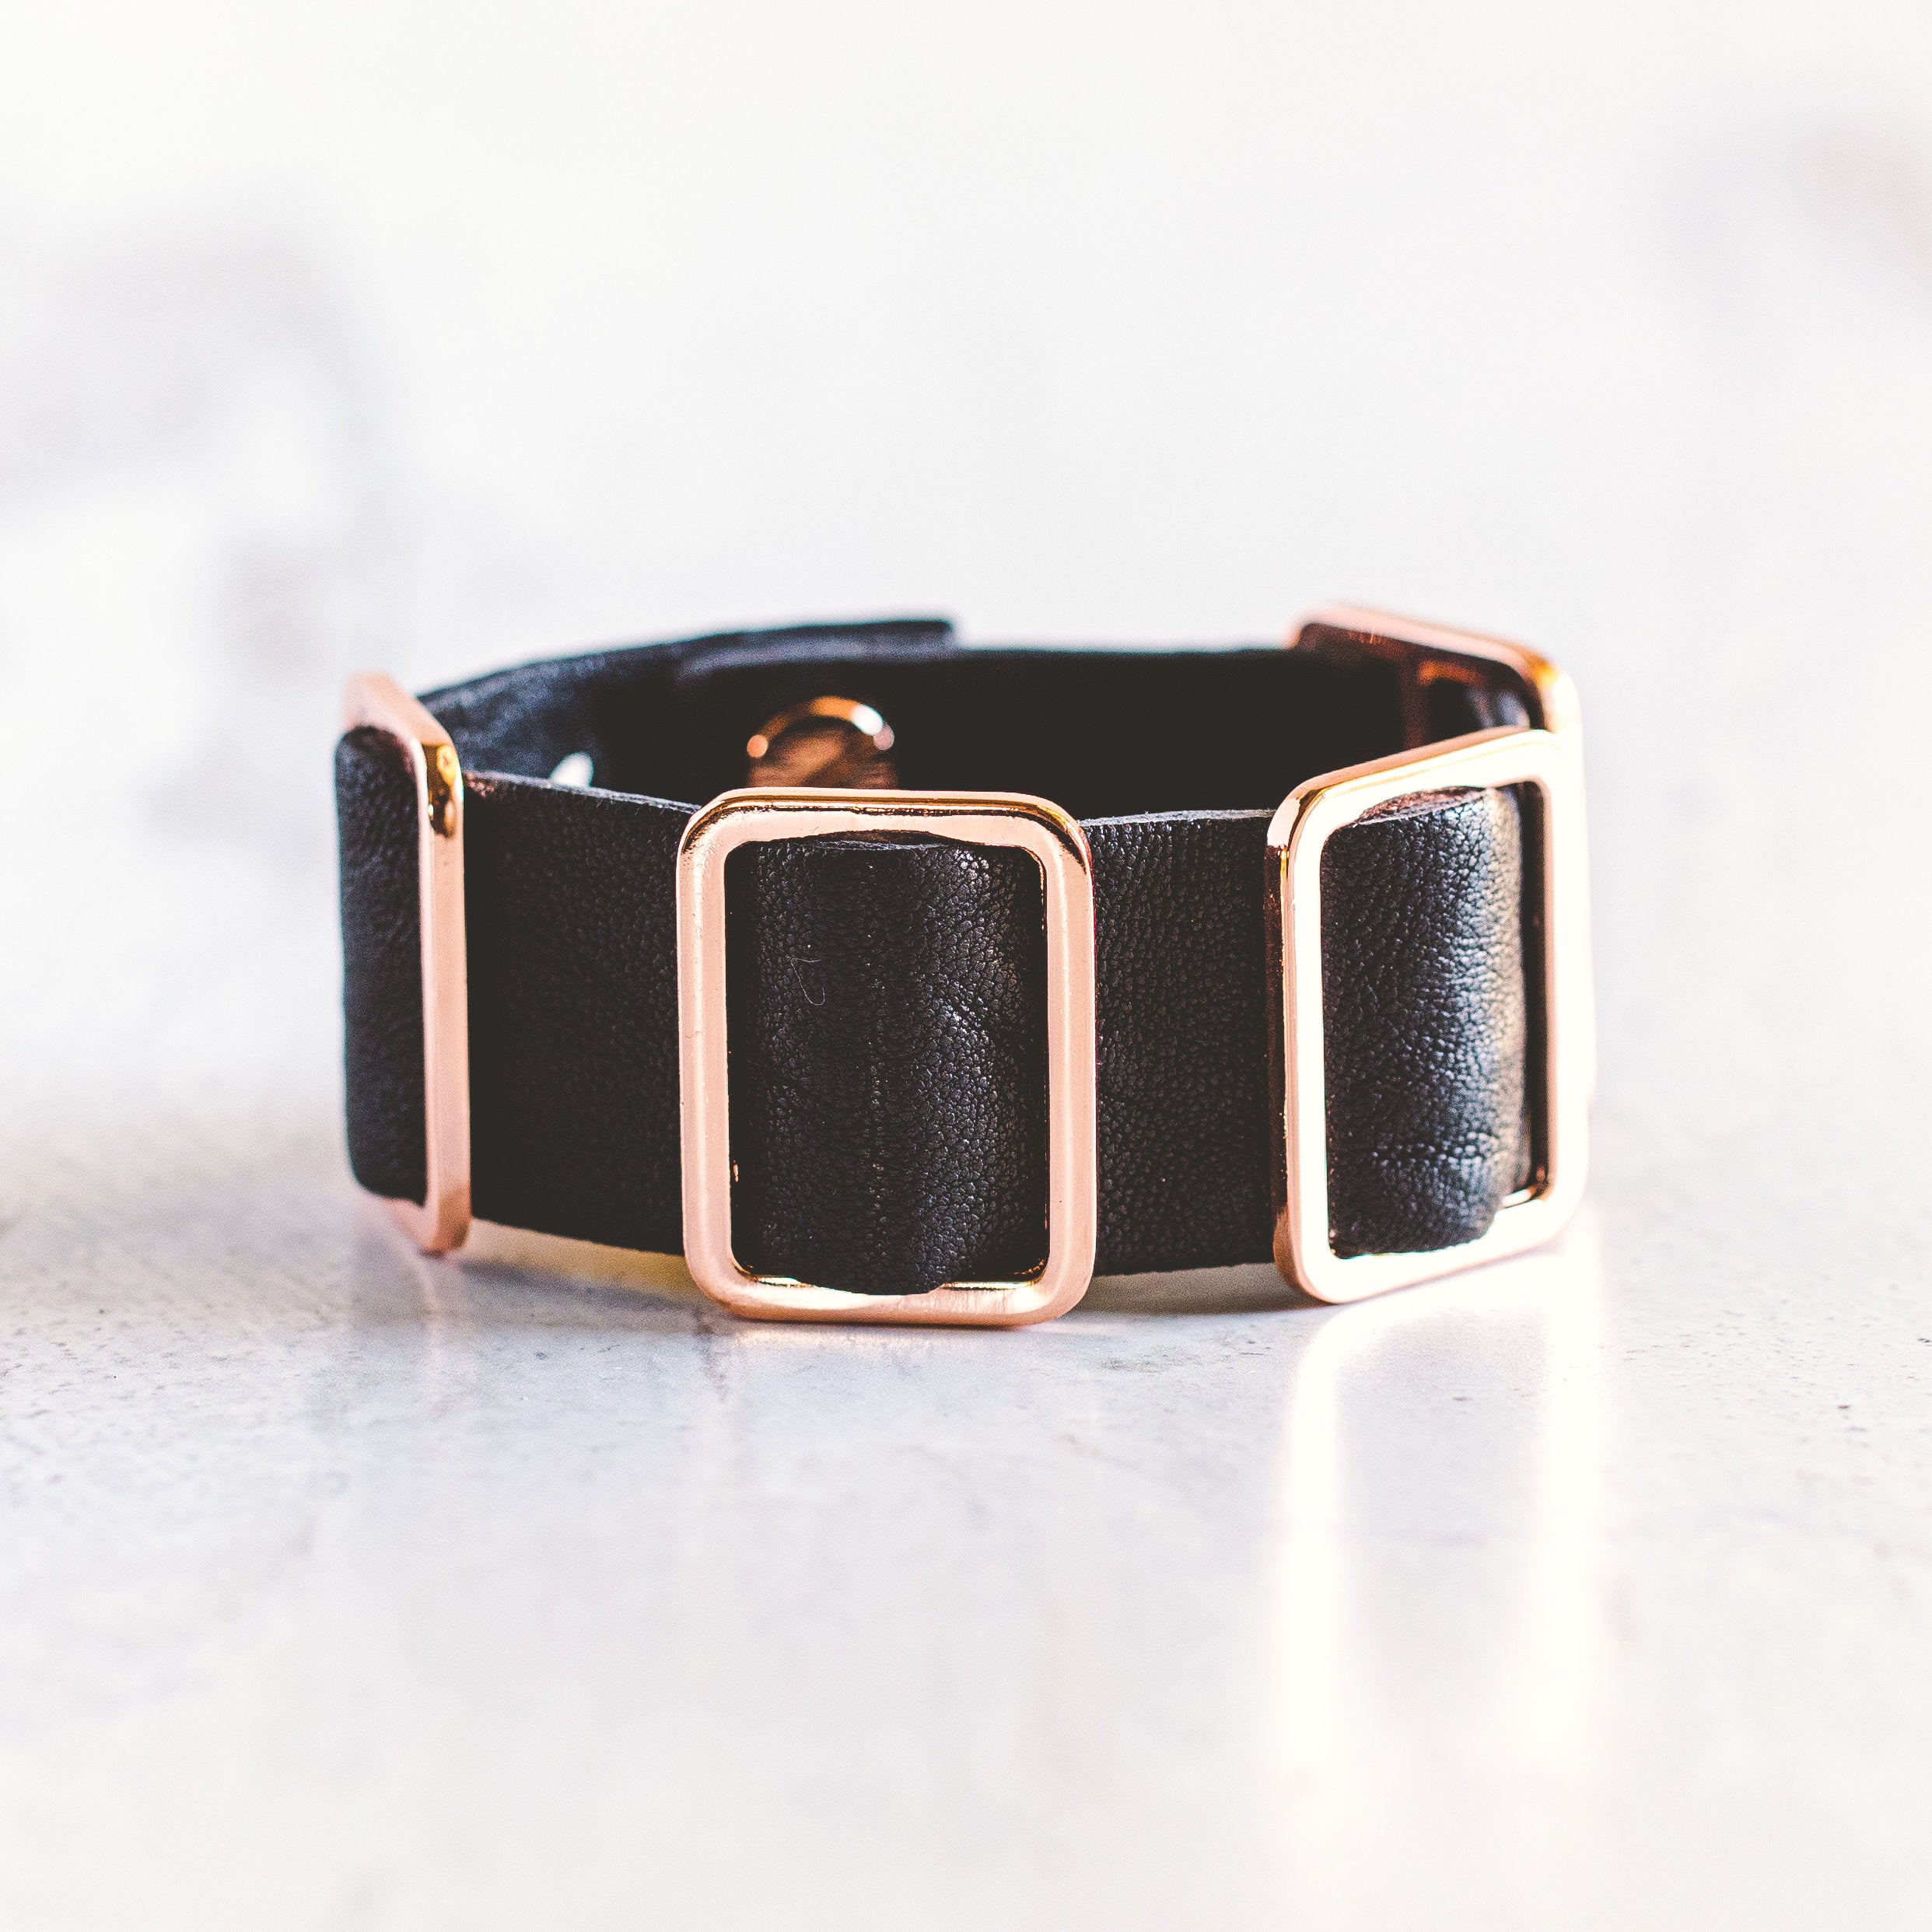 Wide Leather Bracelet Cuff With Rose Gold Buckles | Giving Bracelets